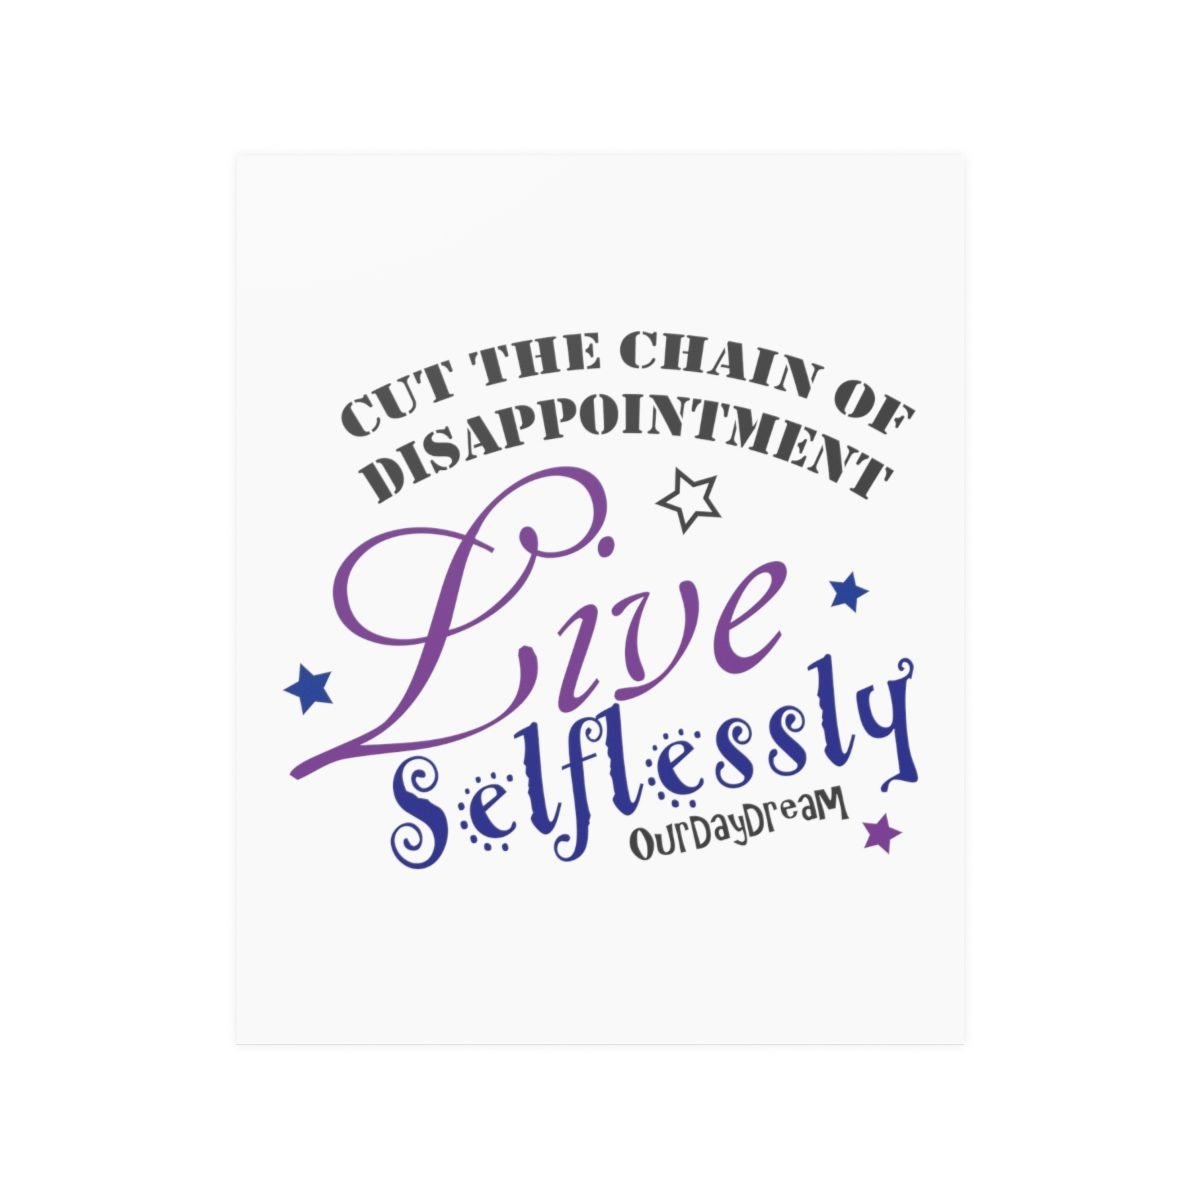 OurDayDream – Live Selflessly Posters